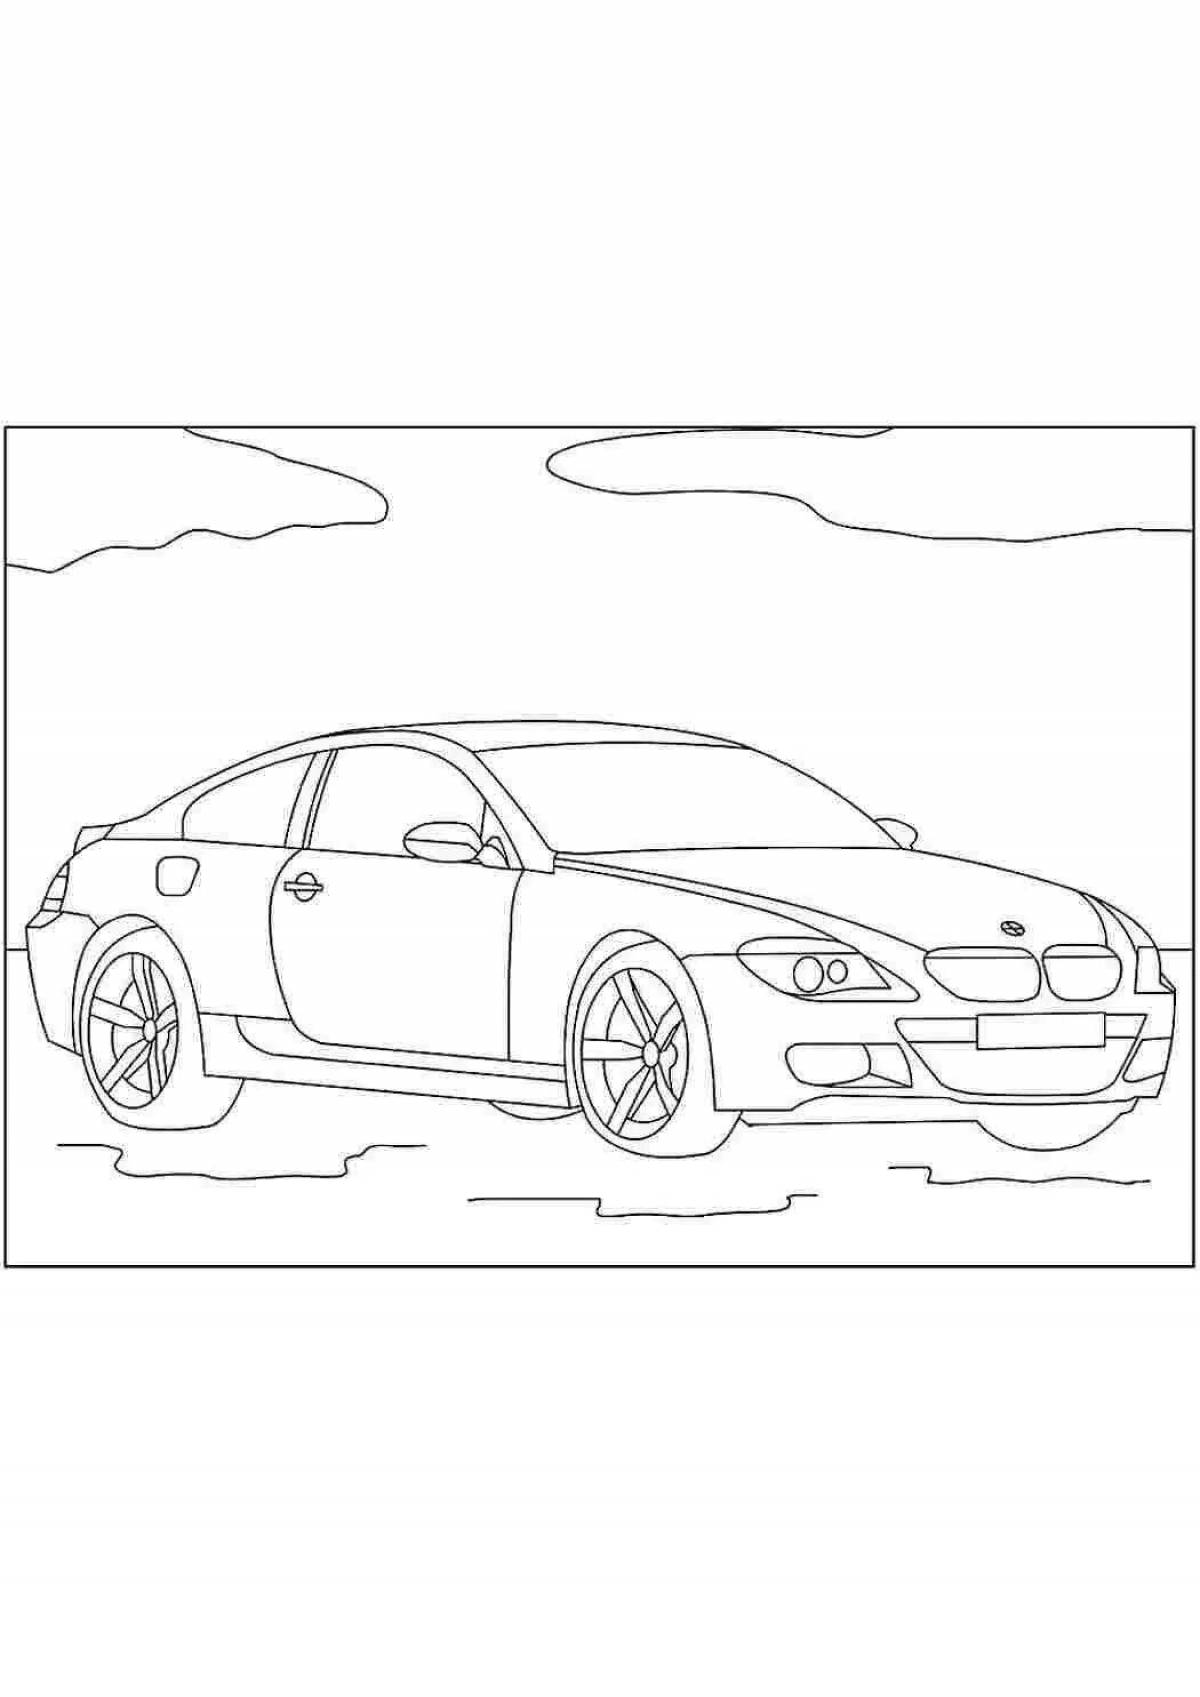 Playful bmw car coloring page